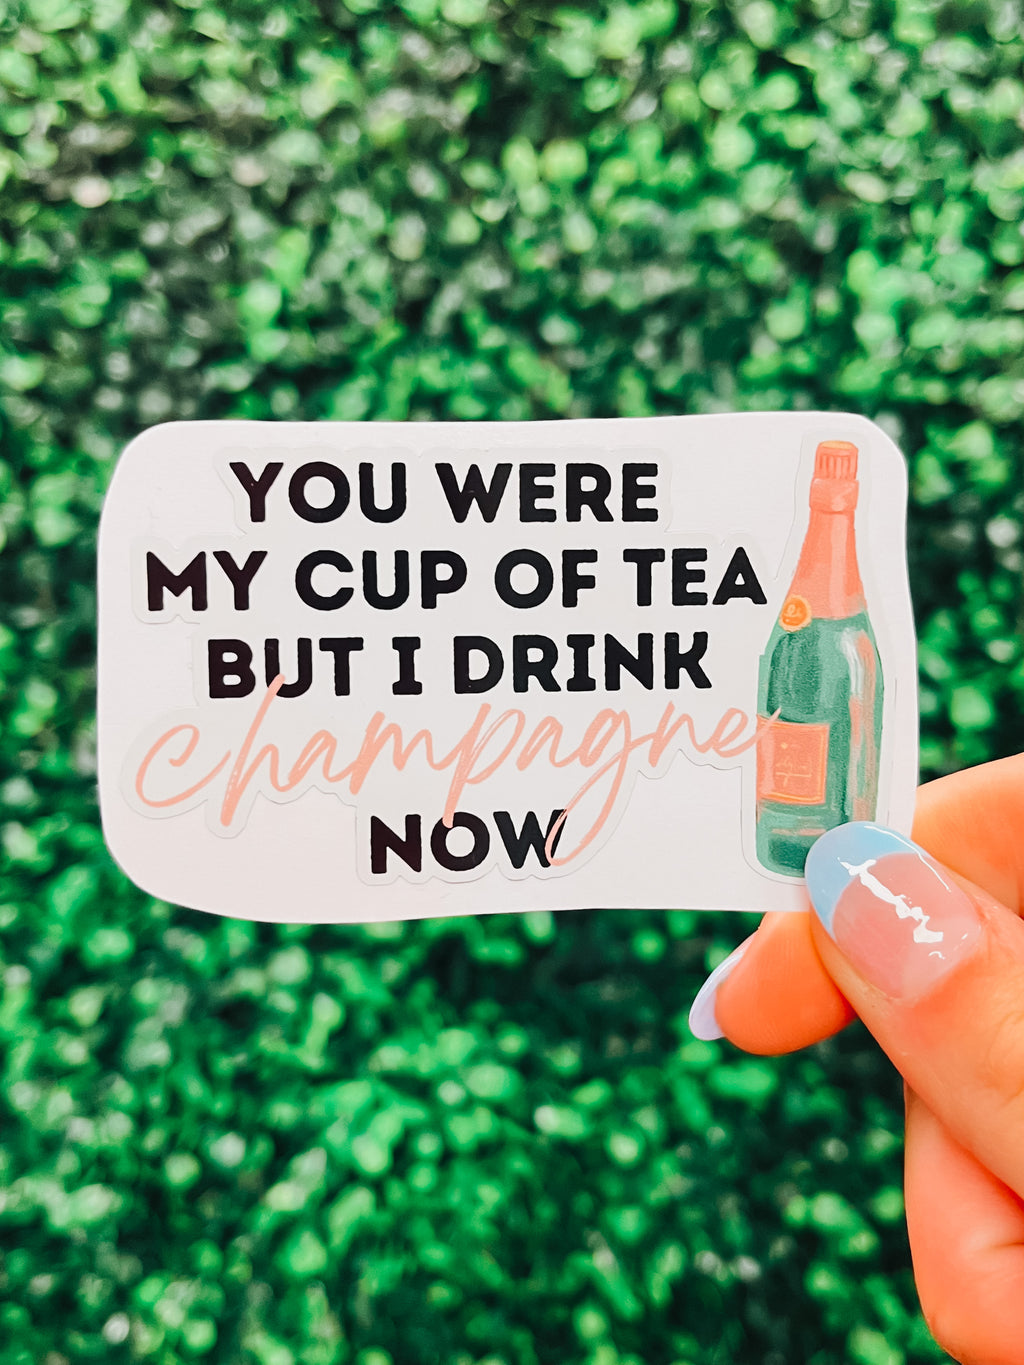 Tired of tea? Spice up your life with our You Were My Cup of Tea Sticker! It comes with the funny yet poignant message - "You were my cup of tea, but I drink champagne now" - so you can let your old beverages know that you've moved on to something more bubbly and luxurious. Plus, it's easy to stick on your laptop or water bottle. Champagne to the old tea cup!